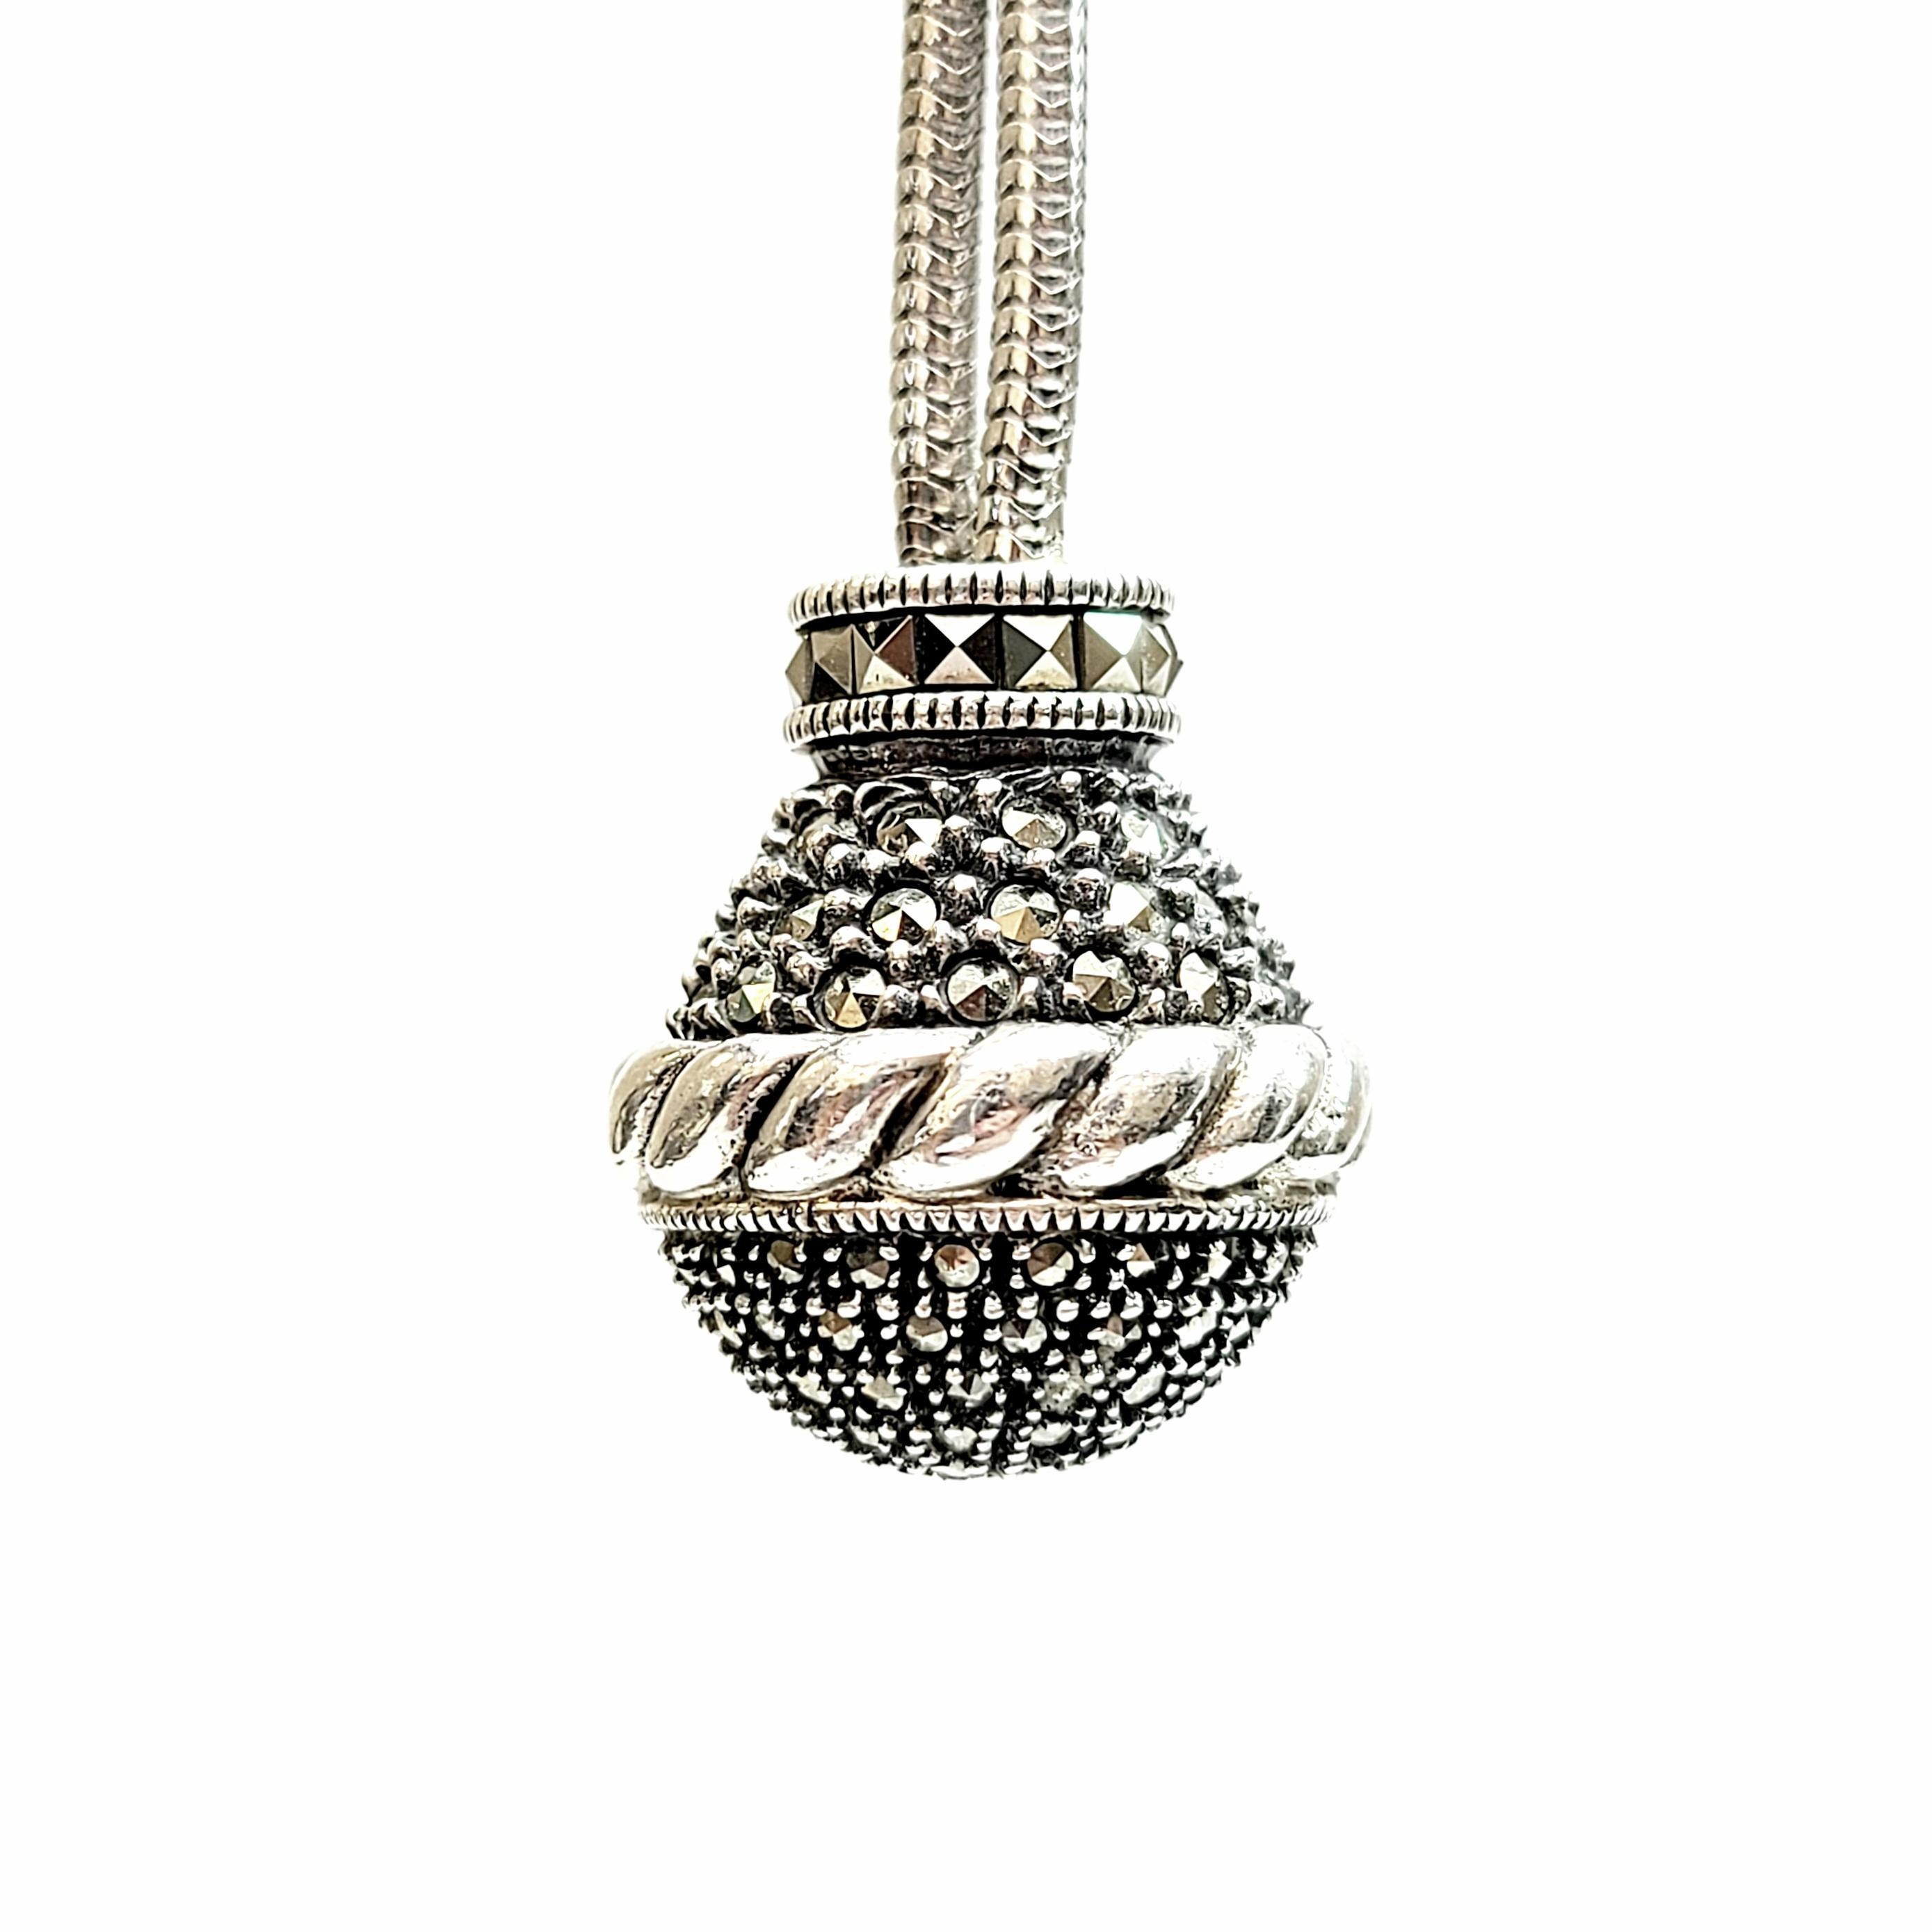 Judith Jack sterling silver and marcasite ball pendant necklace.

A marcasite encrusted ball pendant with rope texture detail hangs from a double snake chain with a rope textured and marcasite bead-like accent.

Chain measures approx 33